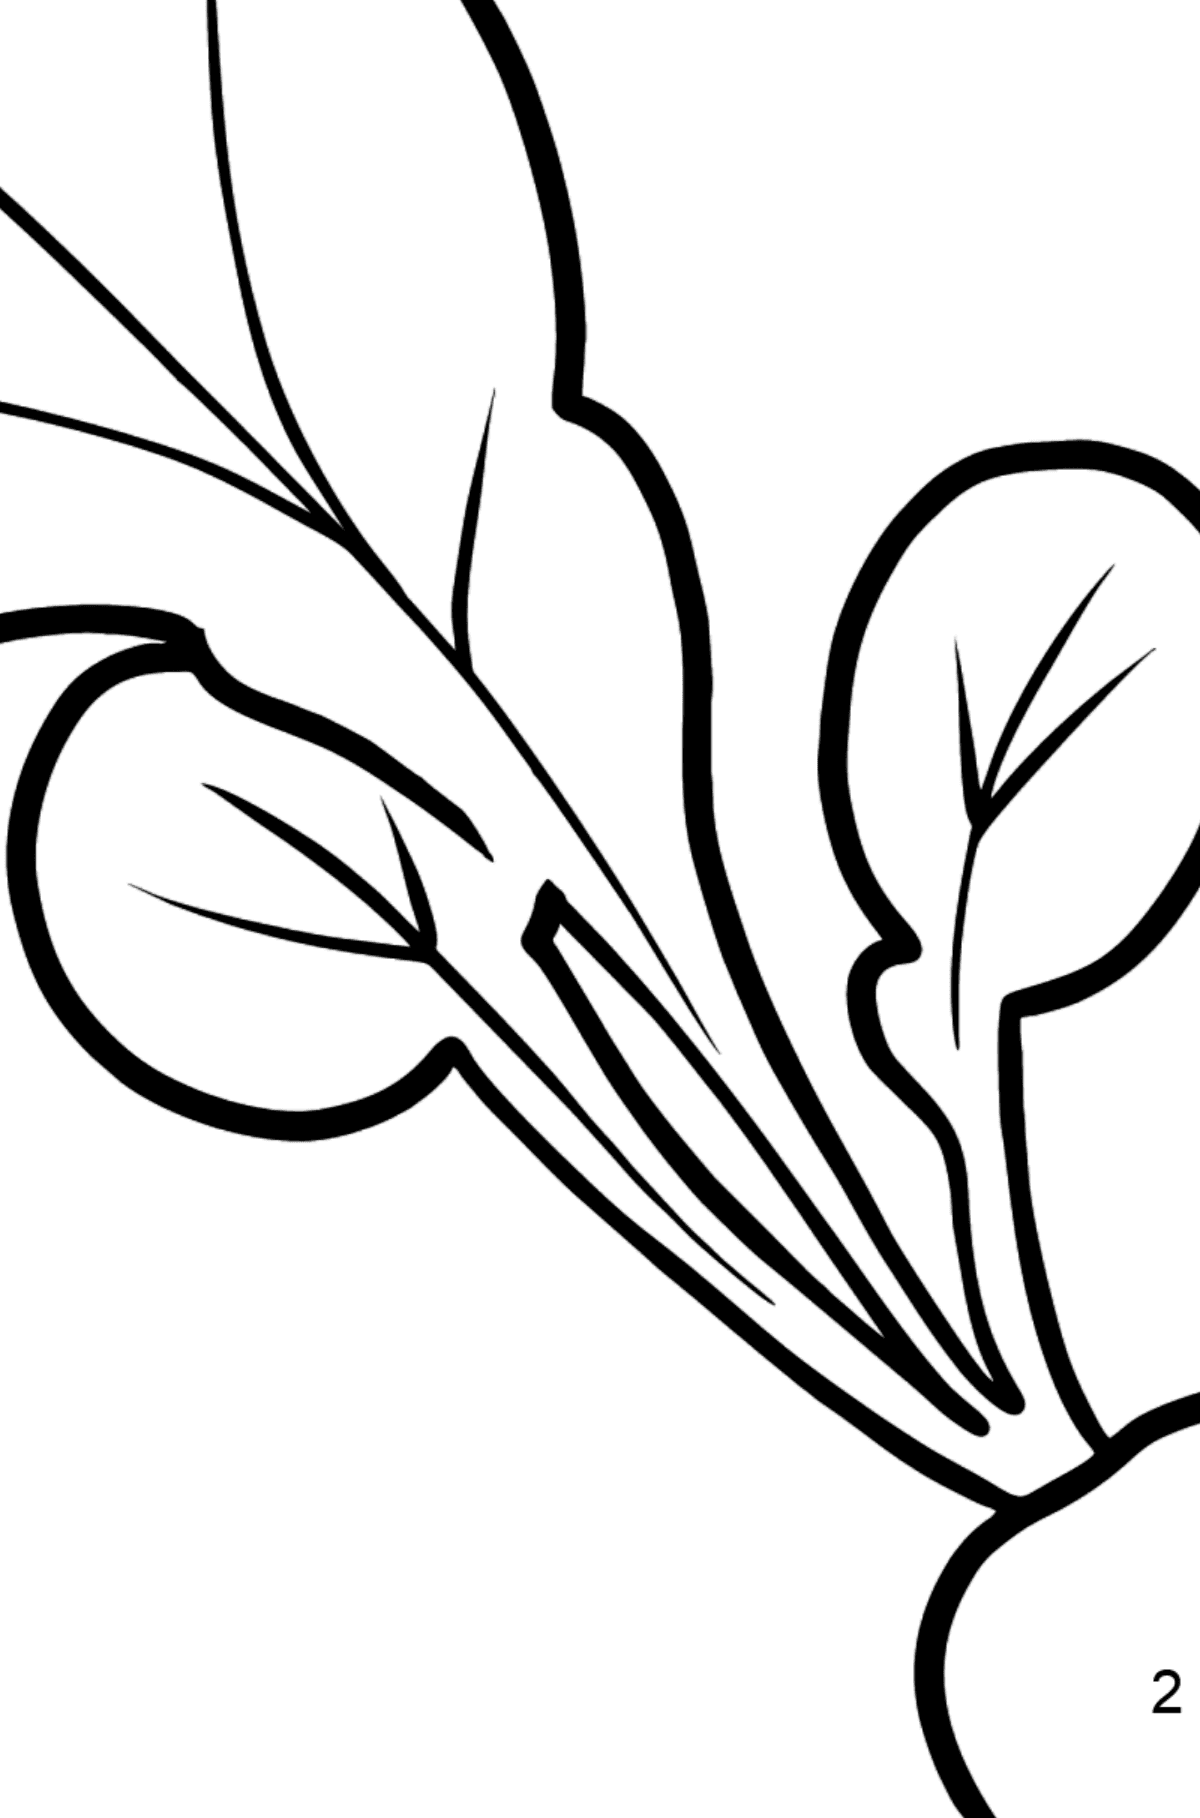 Radish coloring page - Math Coloring - Addition for Kids